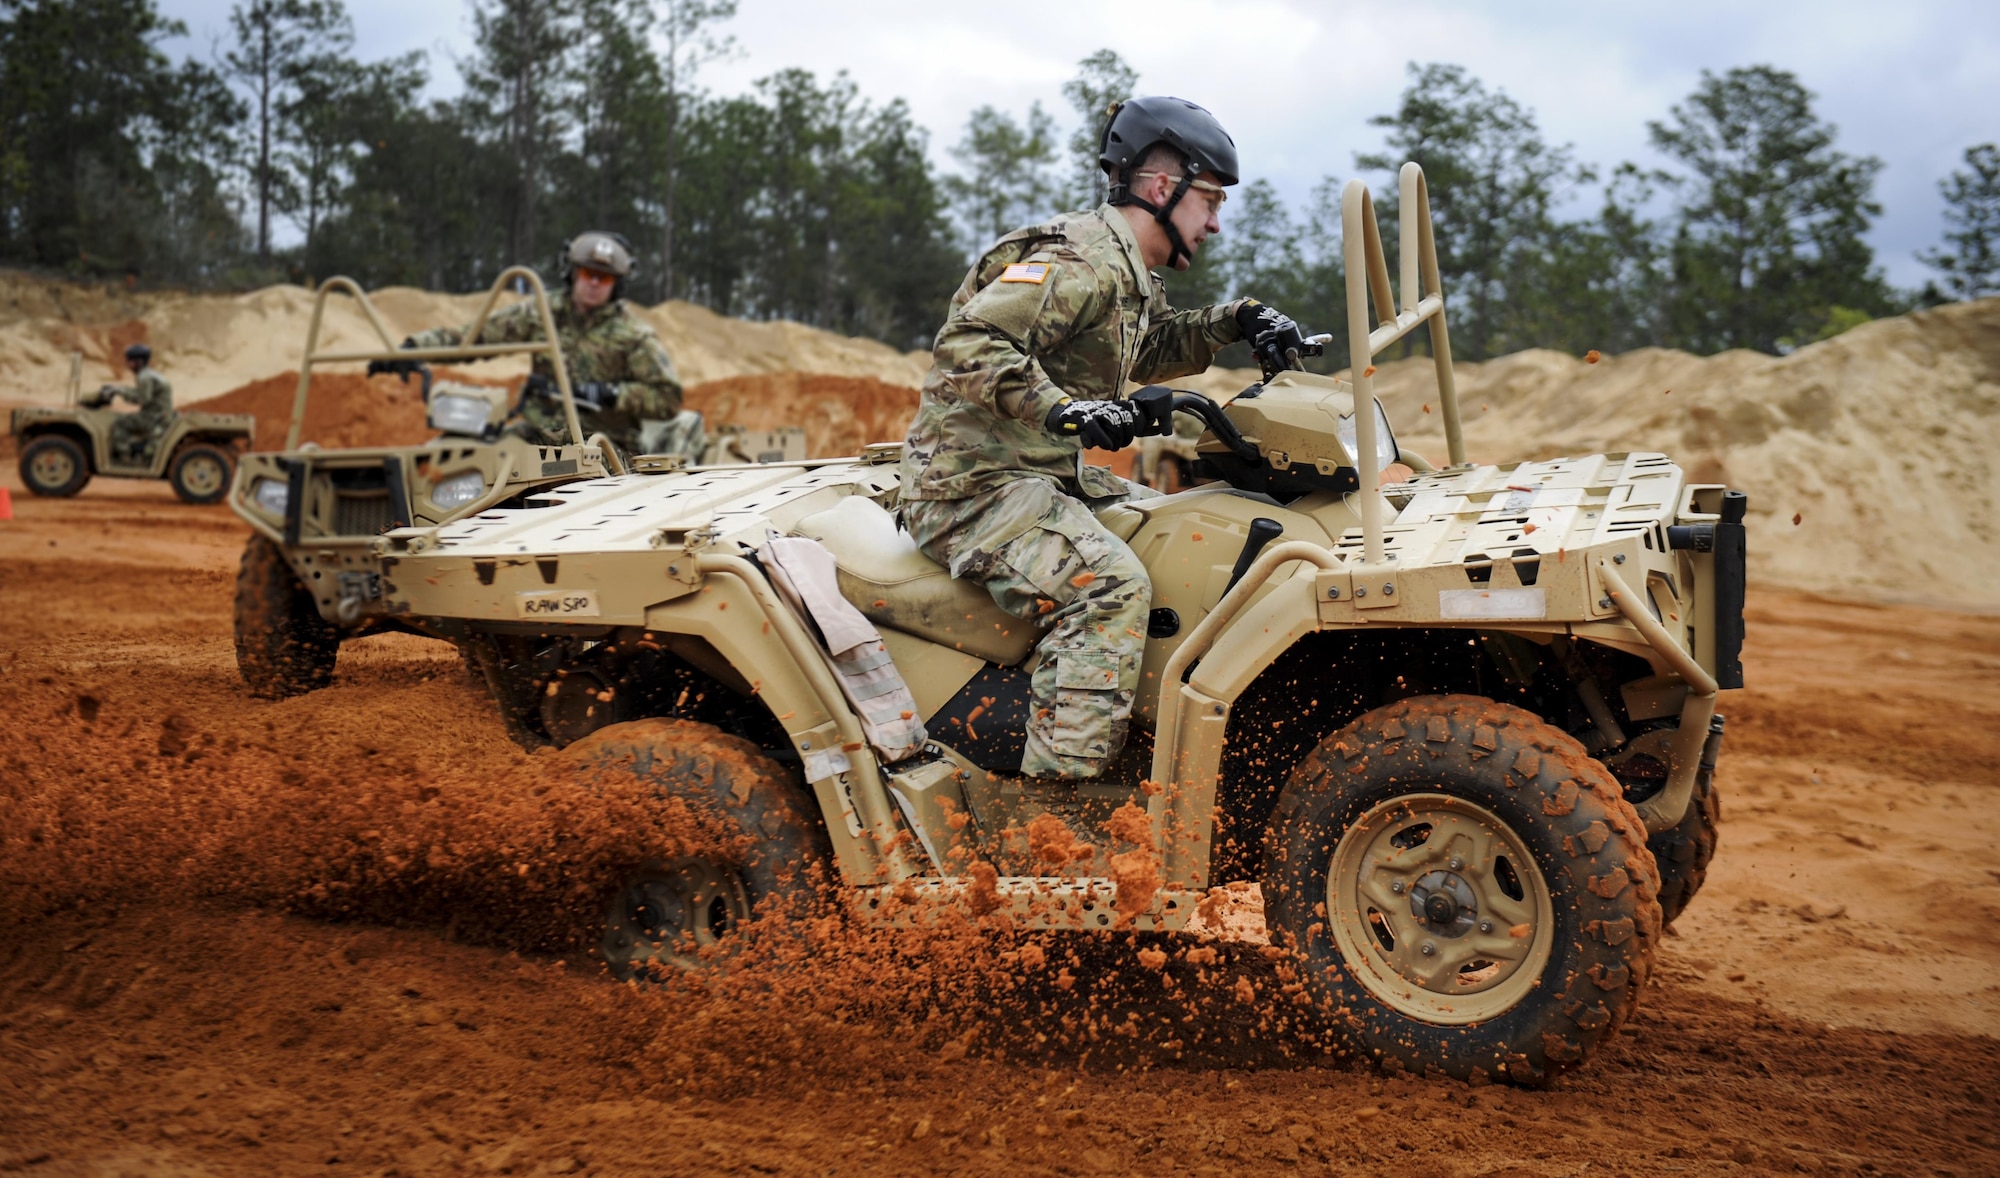 A Soldier with the 1st Battalion, 10th Special Forces Group, executes a sharp turn in an all-terrain vehicle at Buck Pond in Navarre, Fla., March 14, 2017. An instructor with the 1st Special Operations Support Squadron Operational Support Joint Office trained Soldiers on riding techniques to qualify them for ATV usage in special operations missions. (U.S. Air Force photo by Airman 1st Class Dennis Spain)